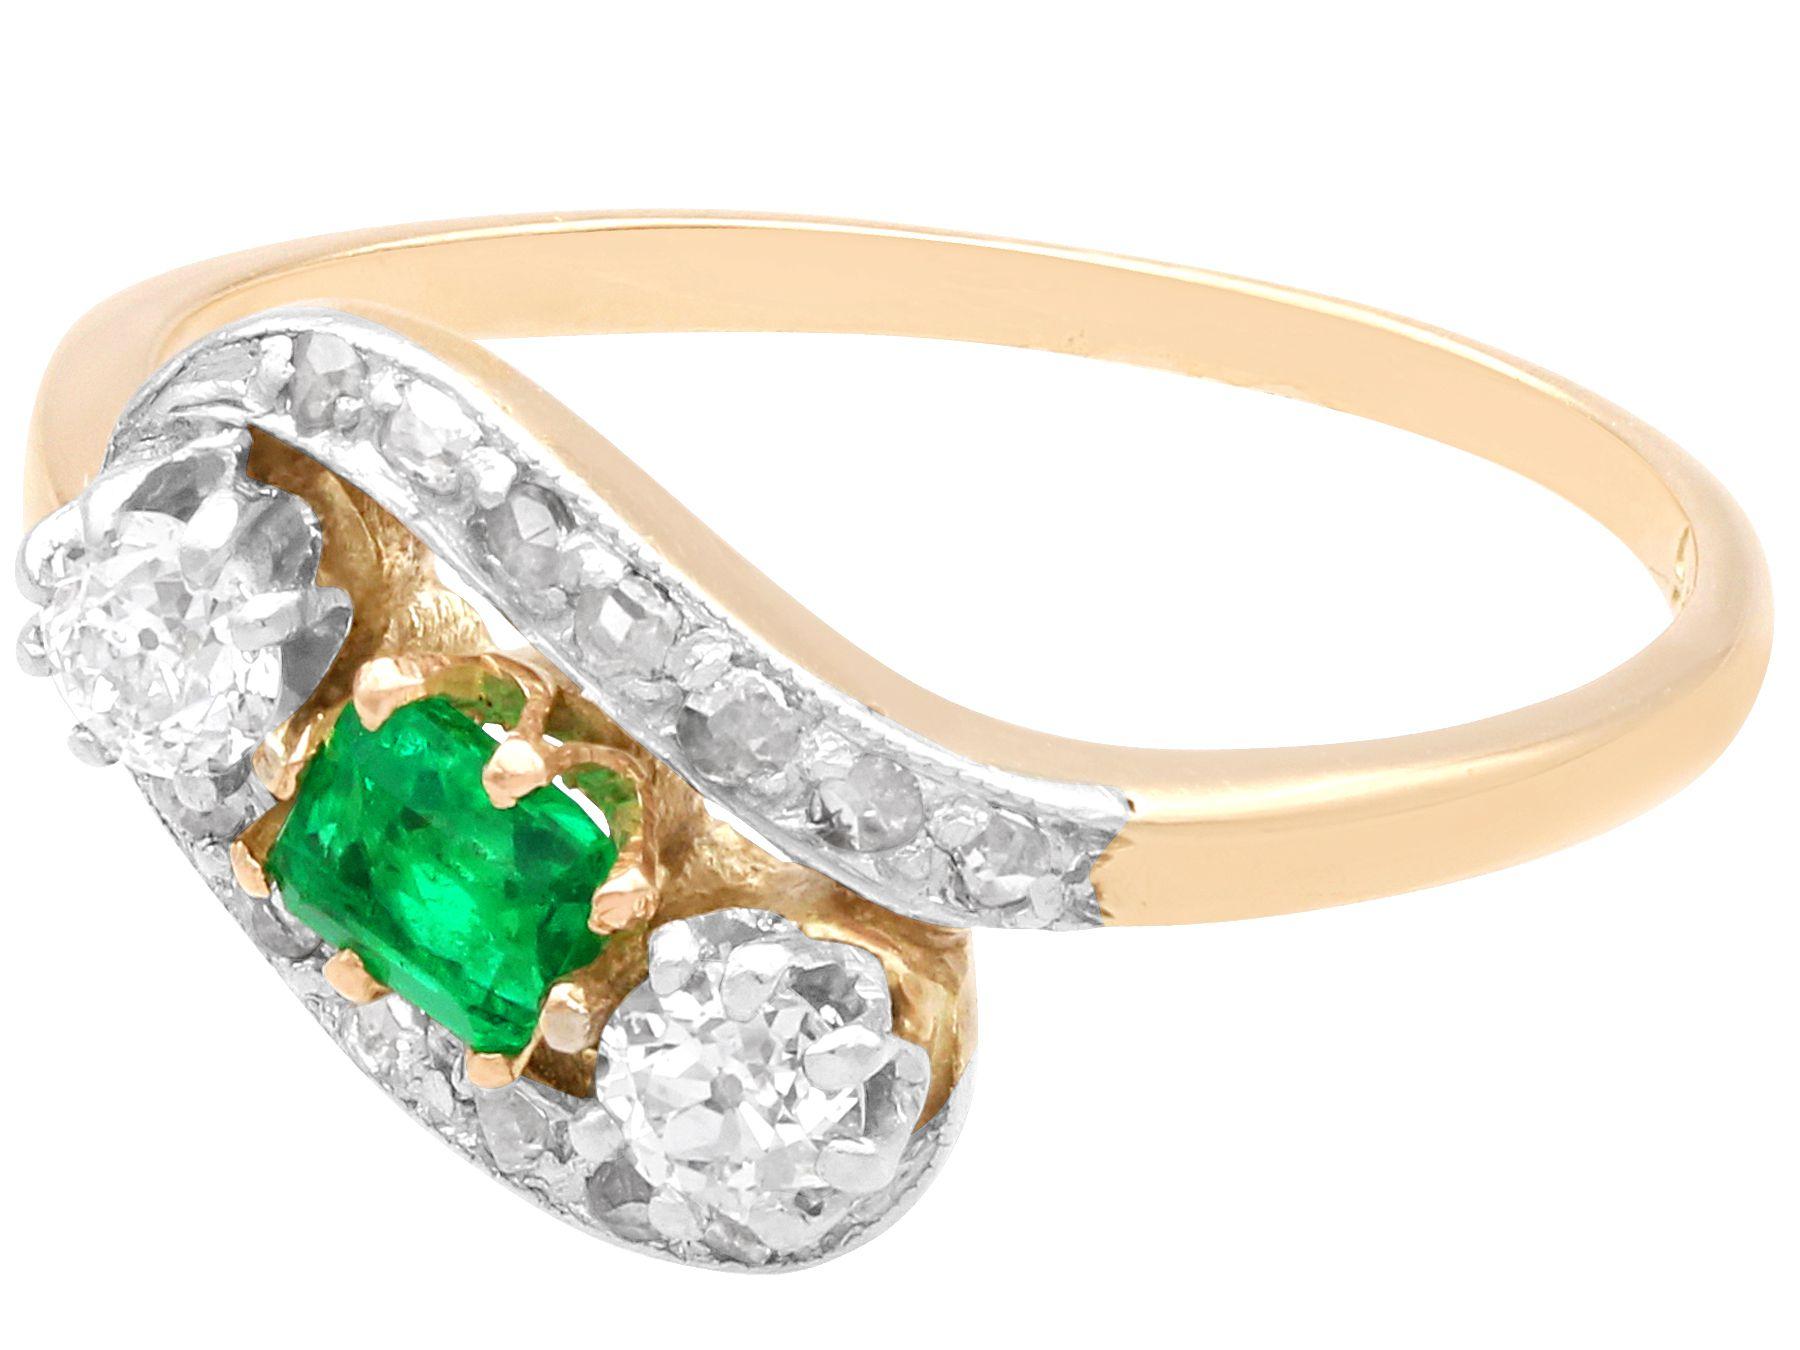 A fine and impressive antique 0.28 carat emerald and 0.45 carat diamond, 14 karat yellow gold twist ring; part of our diverse vintage jewelry collections.

This fine and impressive vintage emerald and diamond ring has been crafted in 14k yellow gold